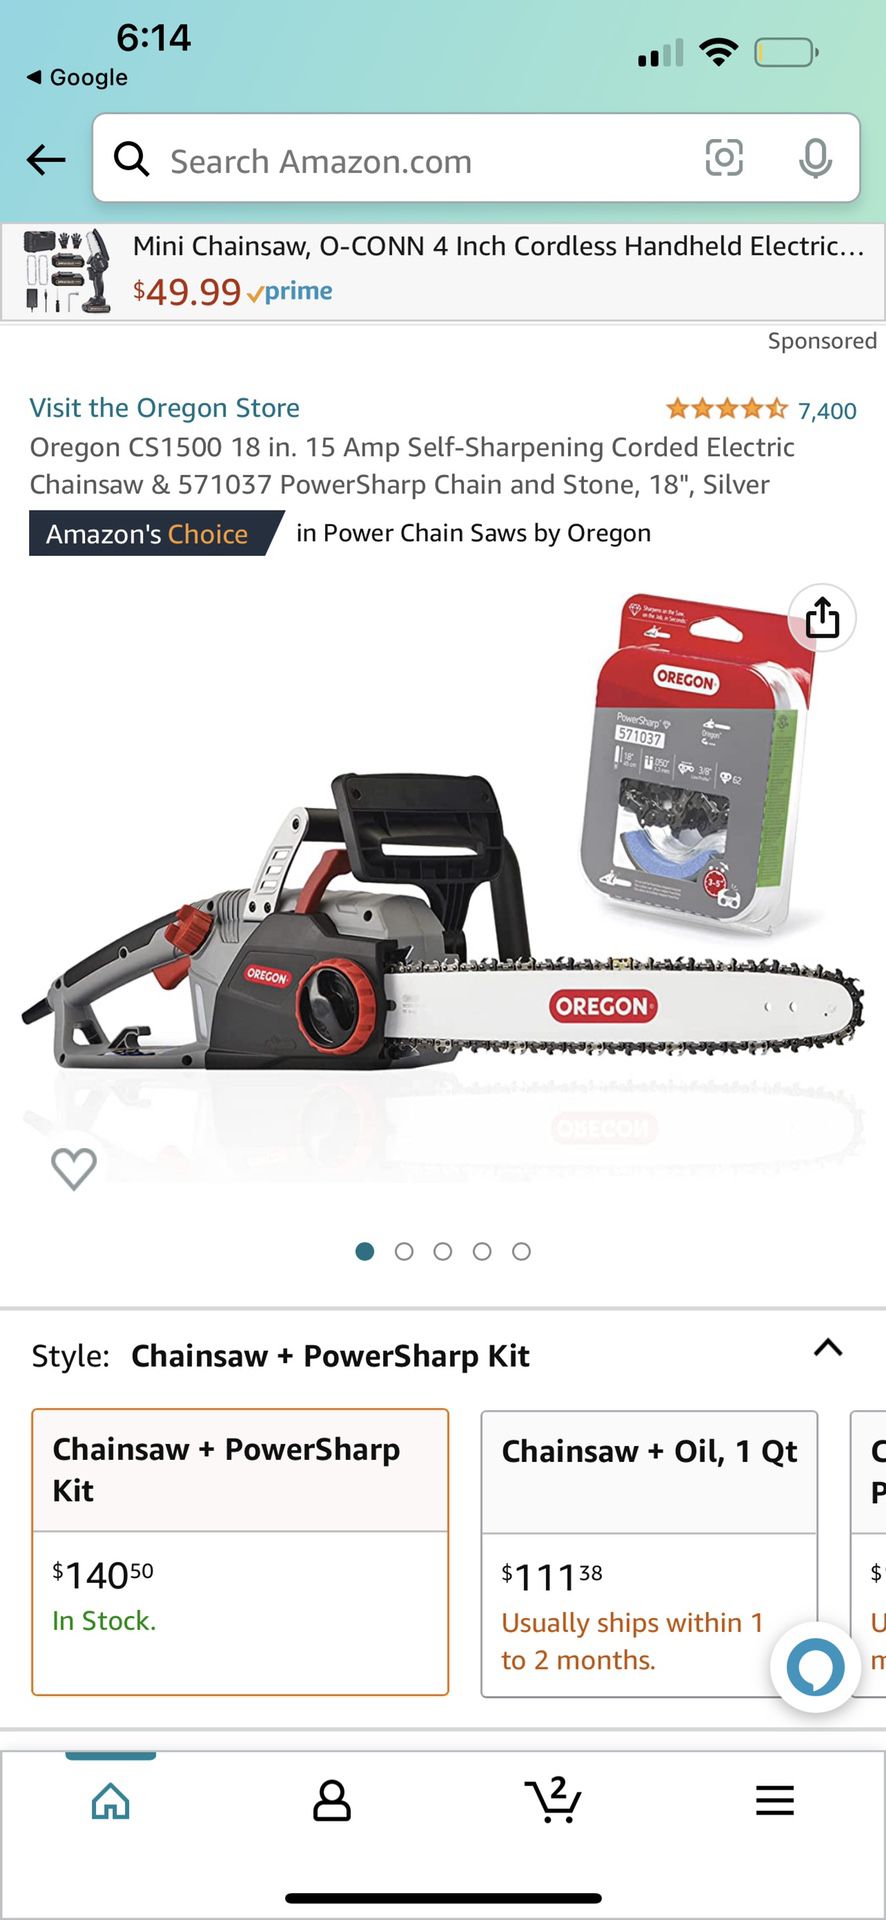 Oregon CS1500 18 in. 15 Amp Self-Sharpening Corded Electric Chainsaw & 571037 PowerSharp Chain and Stone, 18", Silver